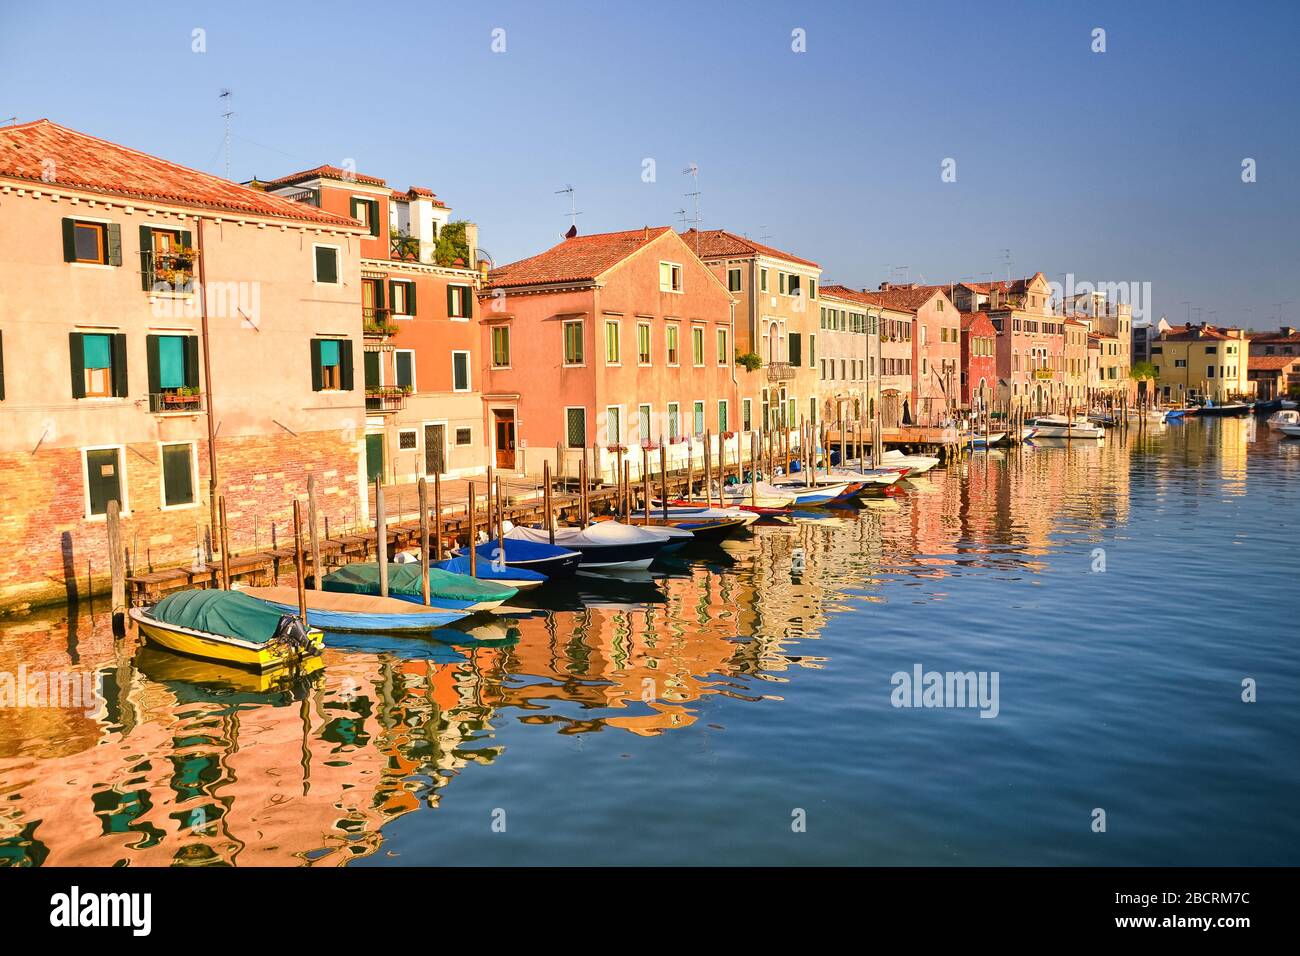 Beautiful colorful houses and boats, Venice landmark, Scenery from famous canal, Italy, Europe Stock Photo